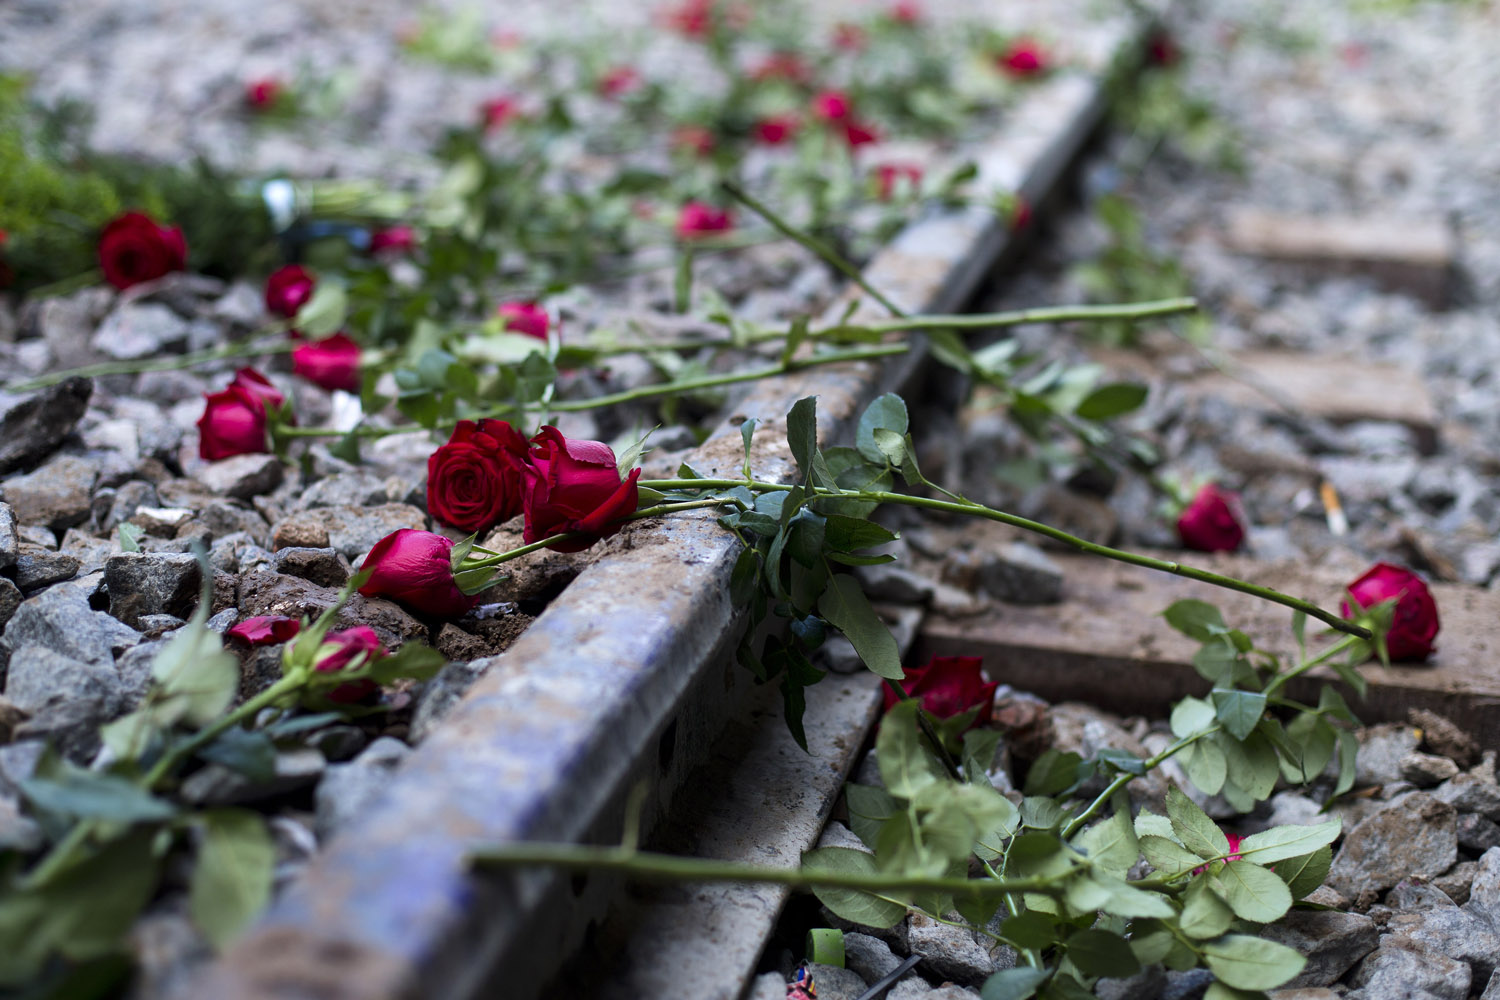 Feb. 22, 2013. Roses grace train tracks, thrown on the tracks by crash victims' relatives, during the one-year anniversary ceremony of a train crash at the Once train station in Buenos Aires.